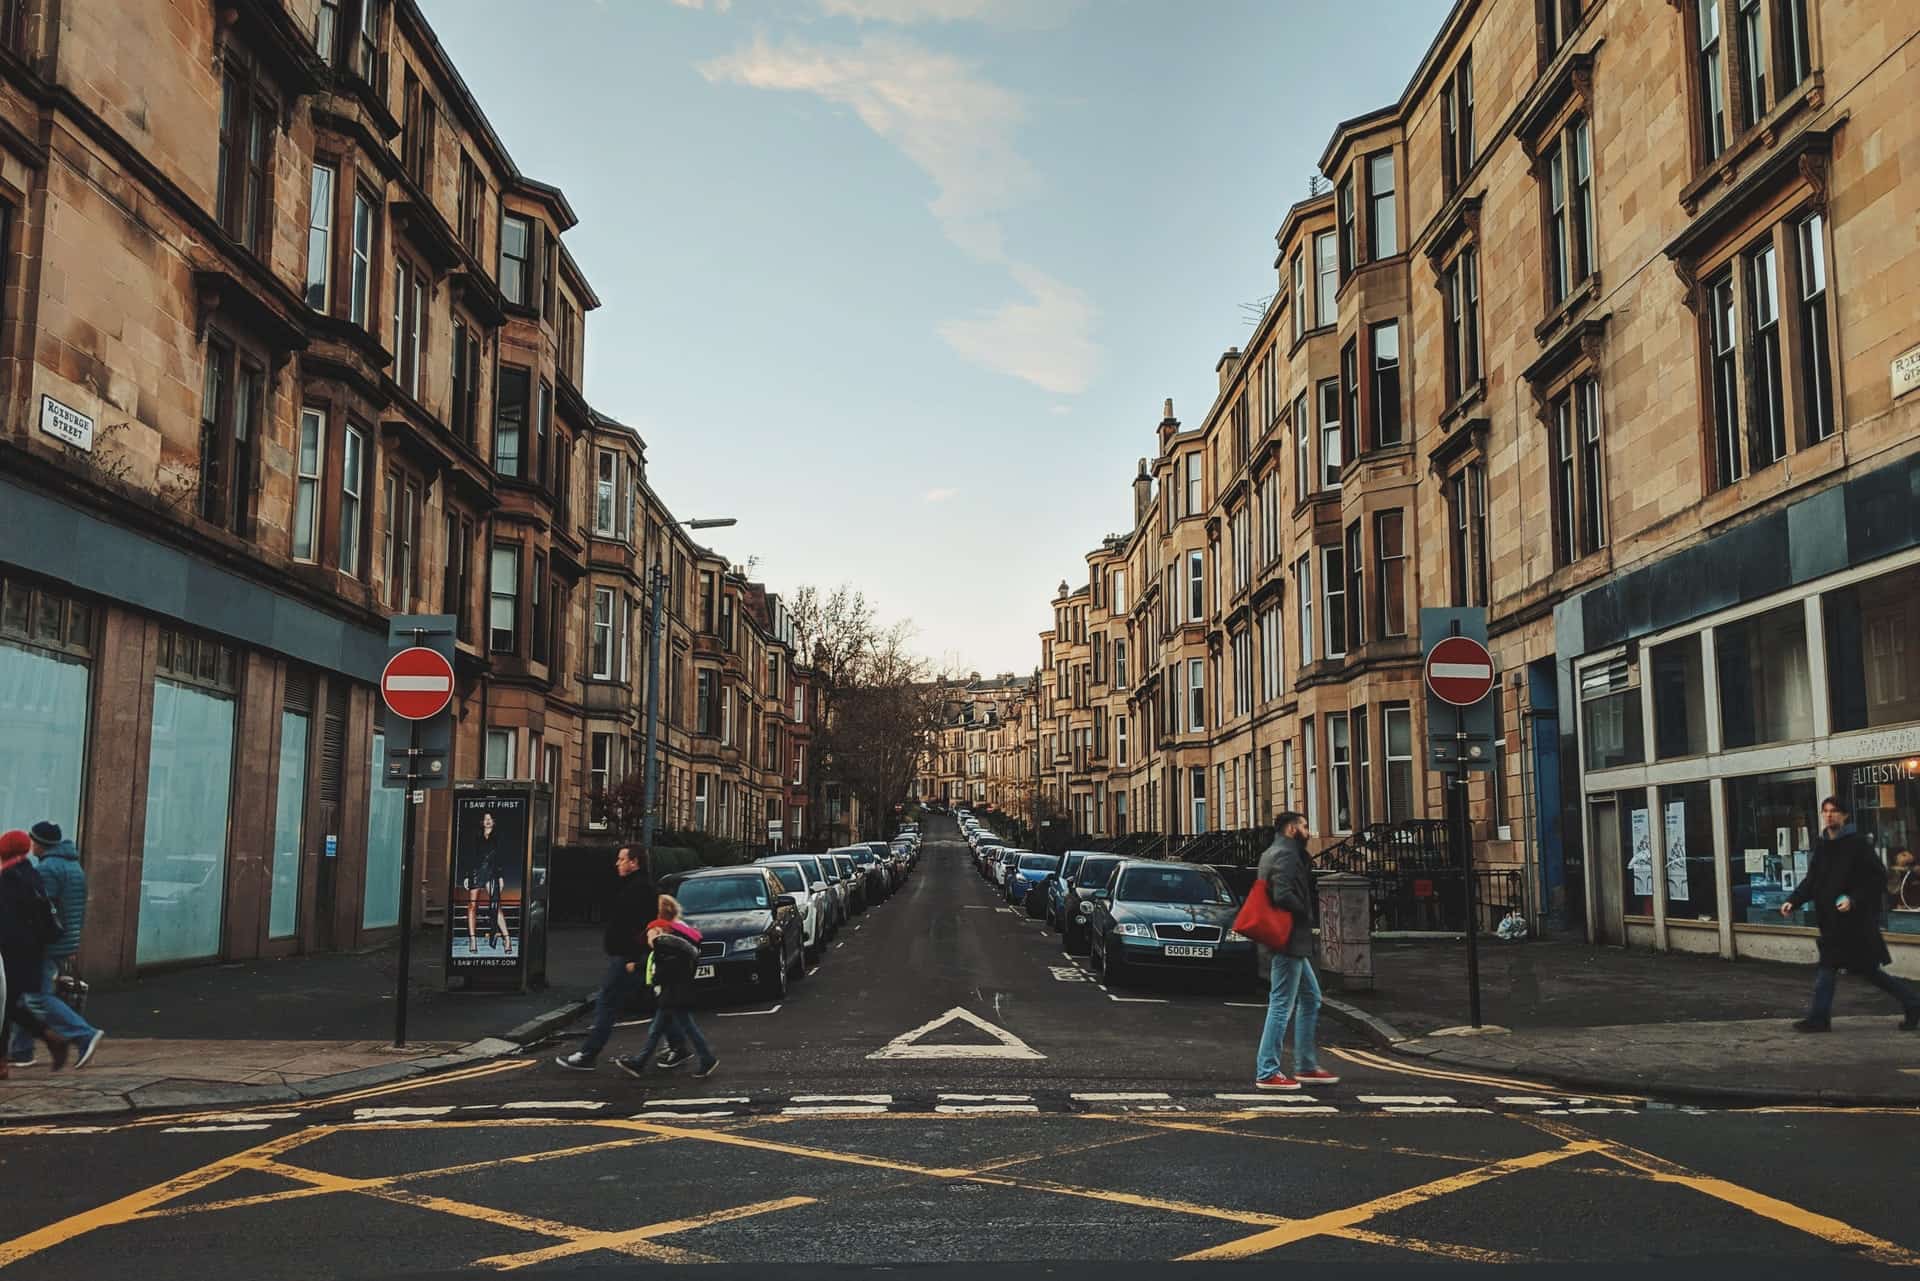 People walking across a road in Glasgow in front of a row of houses and cars.